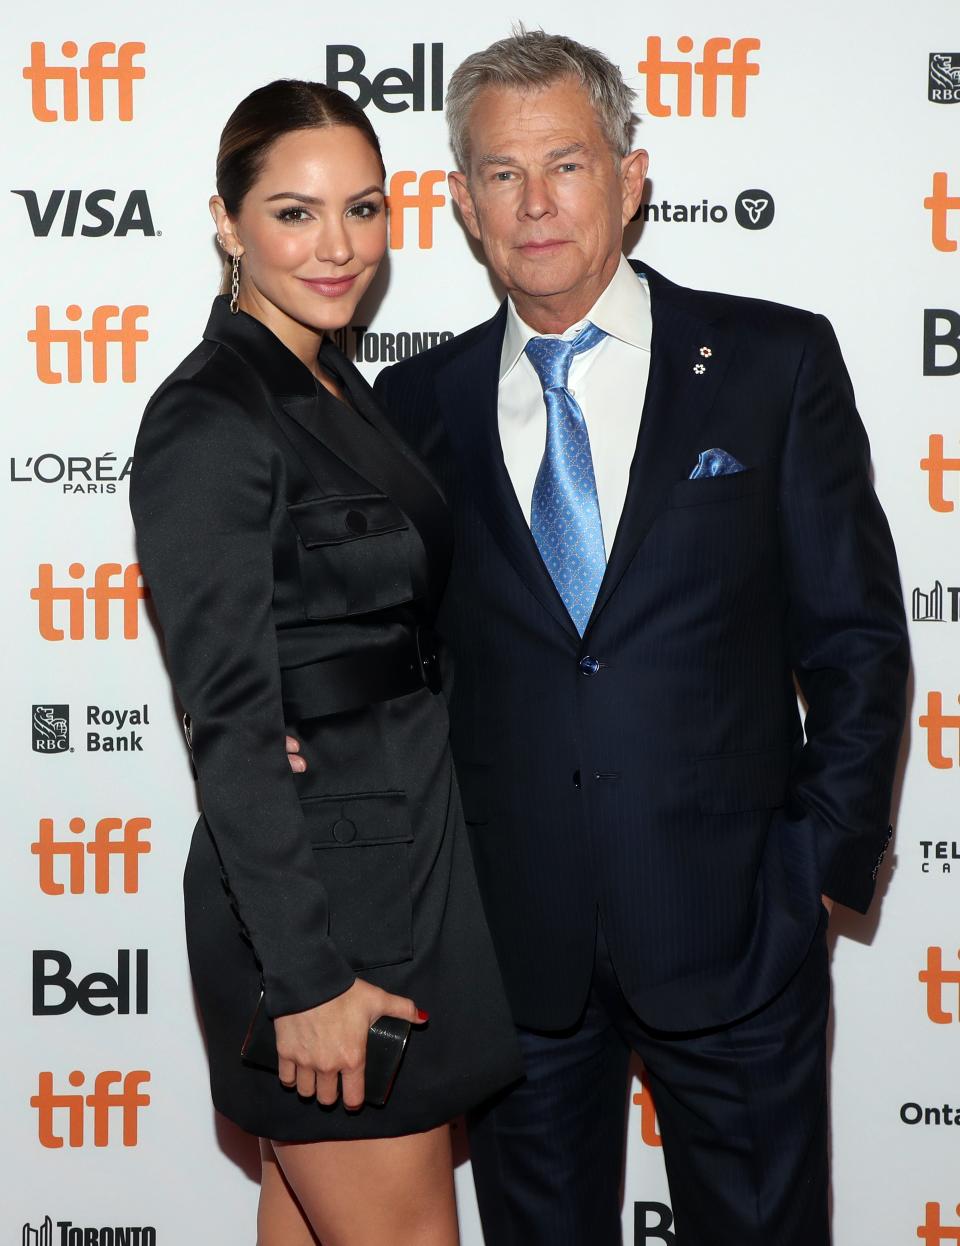 Congratulations are in order for Katharine McPhee and David Foster, who have welcomed their first child together.